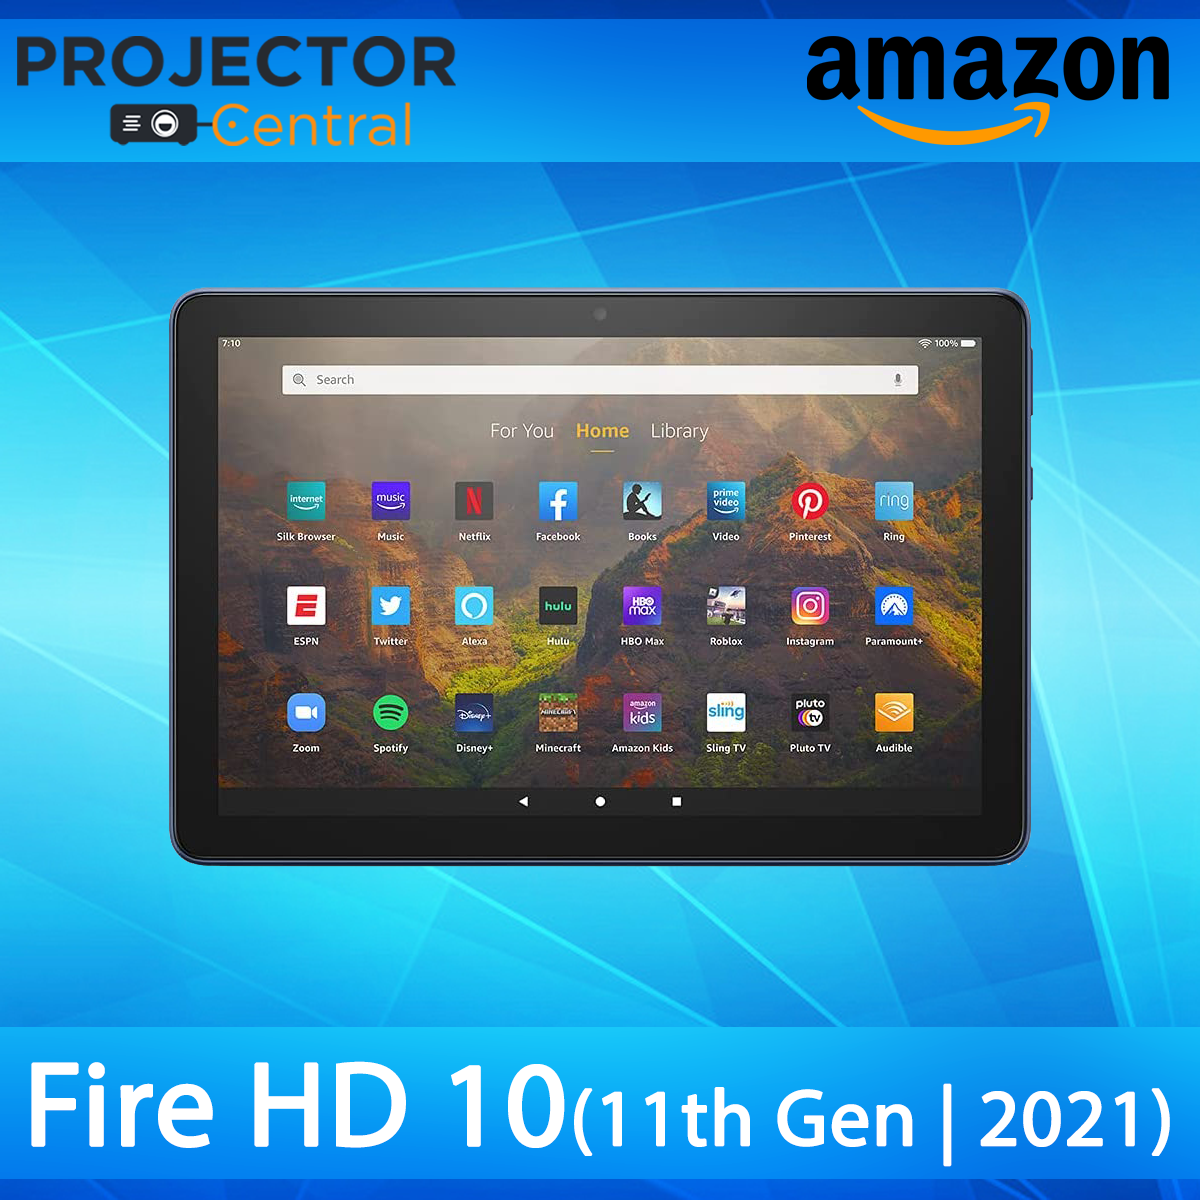 Amazon Fire HD 10 tablet, 10.1", 1080p Full HD, 32GB or 64GB and Introducing Fire HD 10 Plus tablet, 10.1", 1080p Full HD, 32GB or 64GB (11th Gen | 2021 Release)